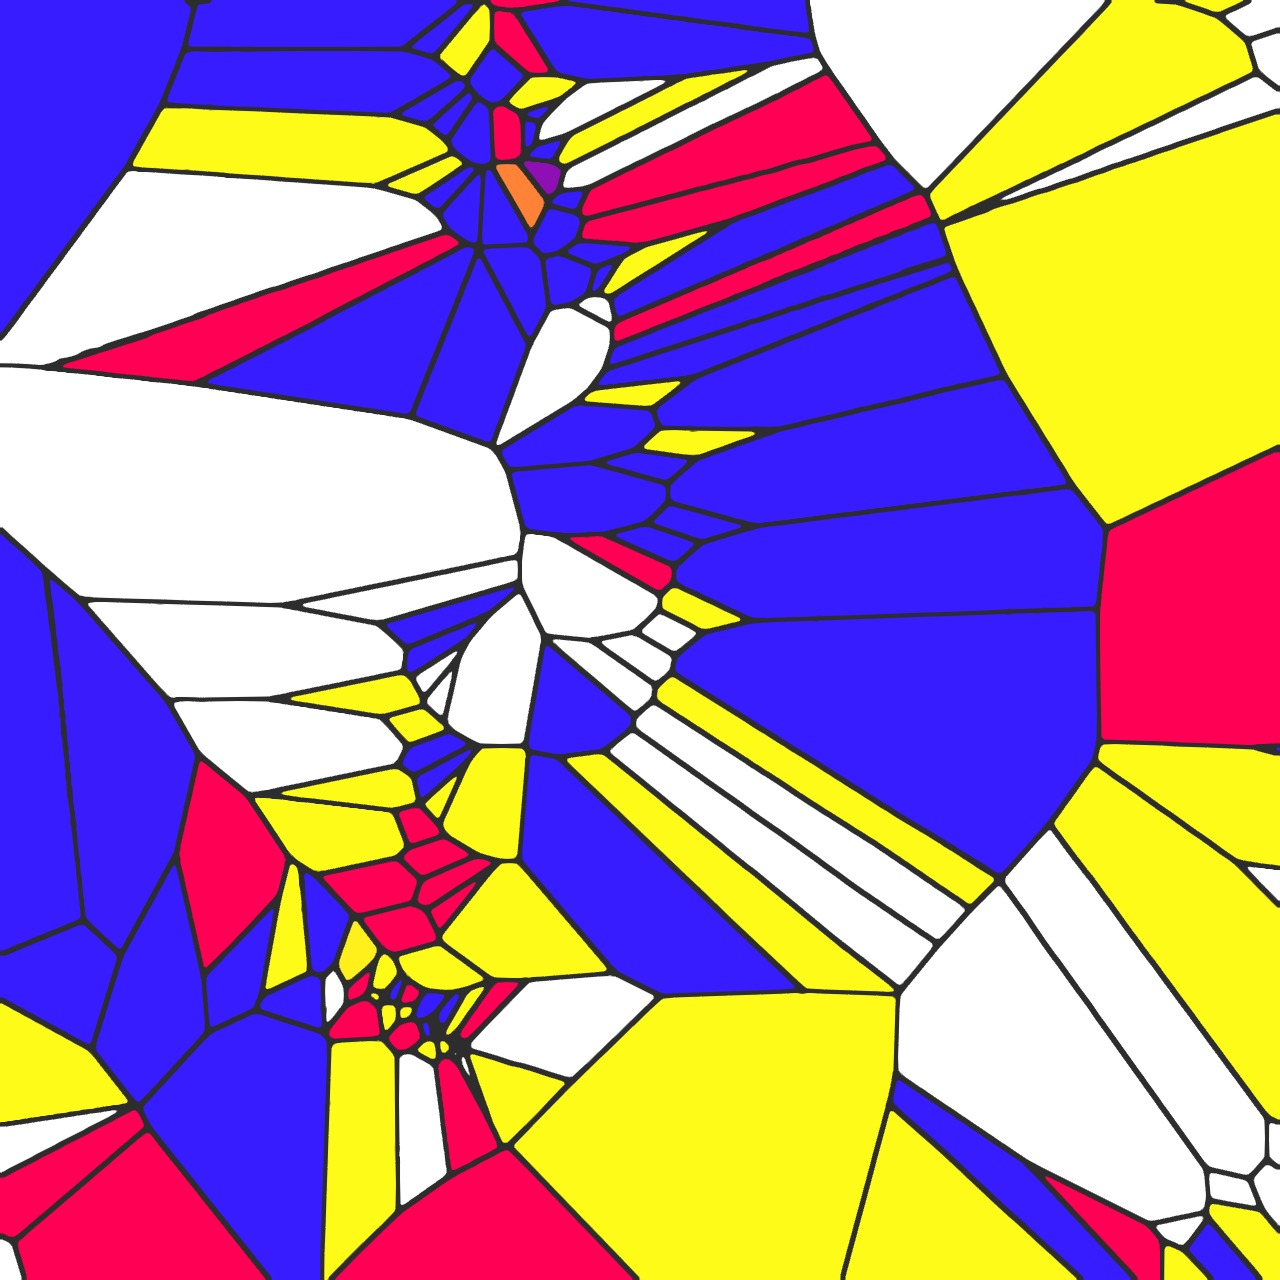 Voronoi pattern produced by Code